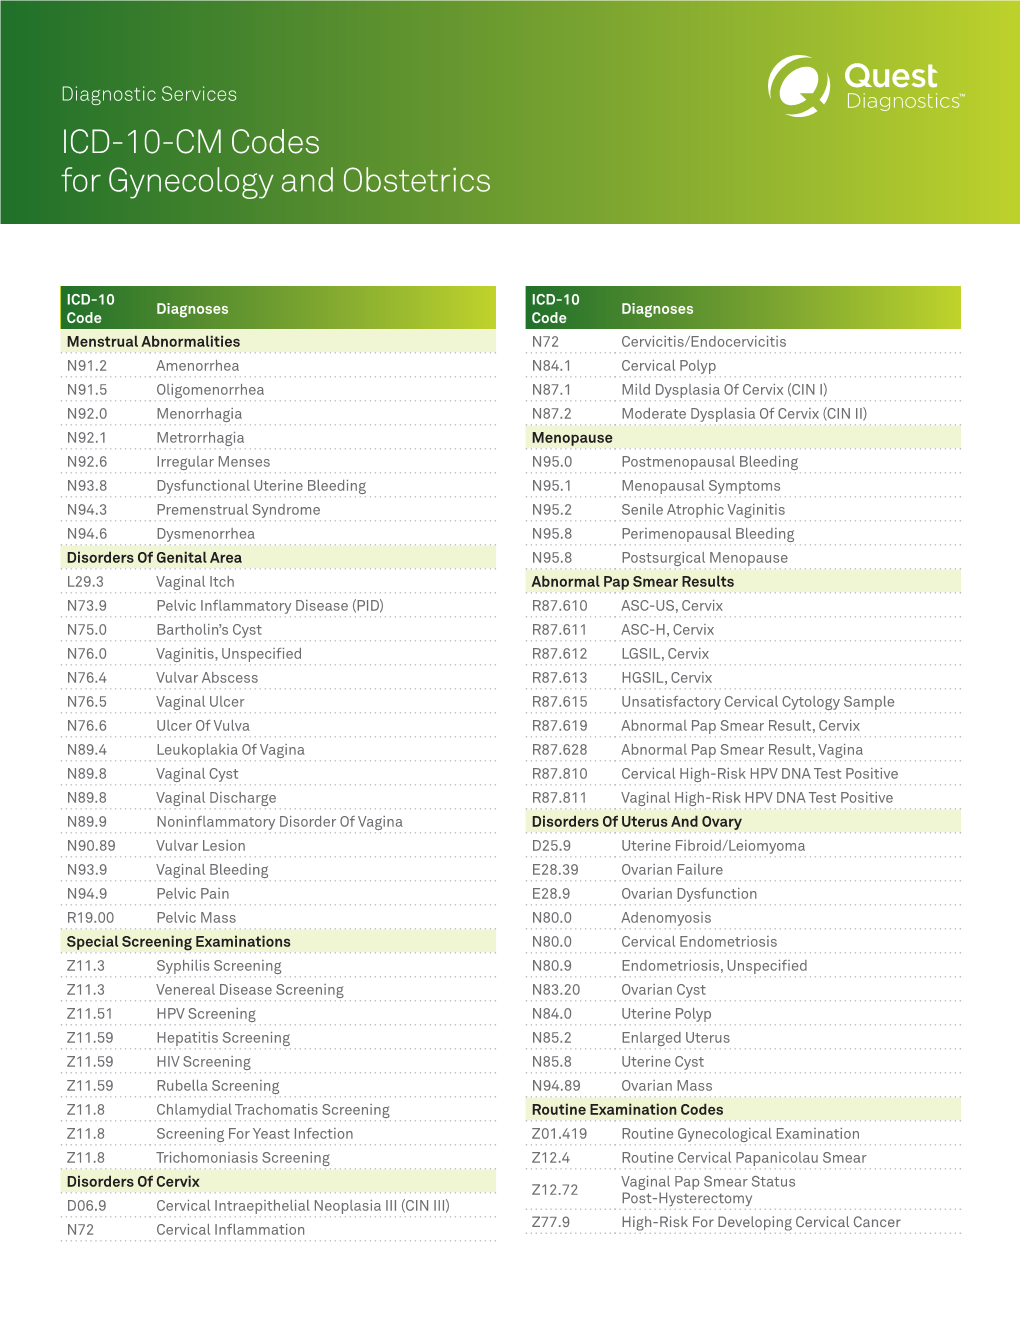 ICD-10-CM Codes for Gynecology and Obstetrics